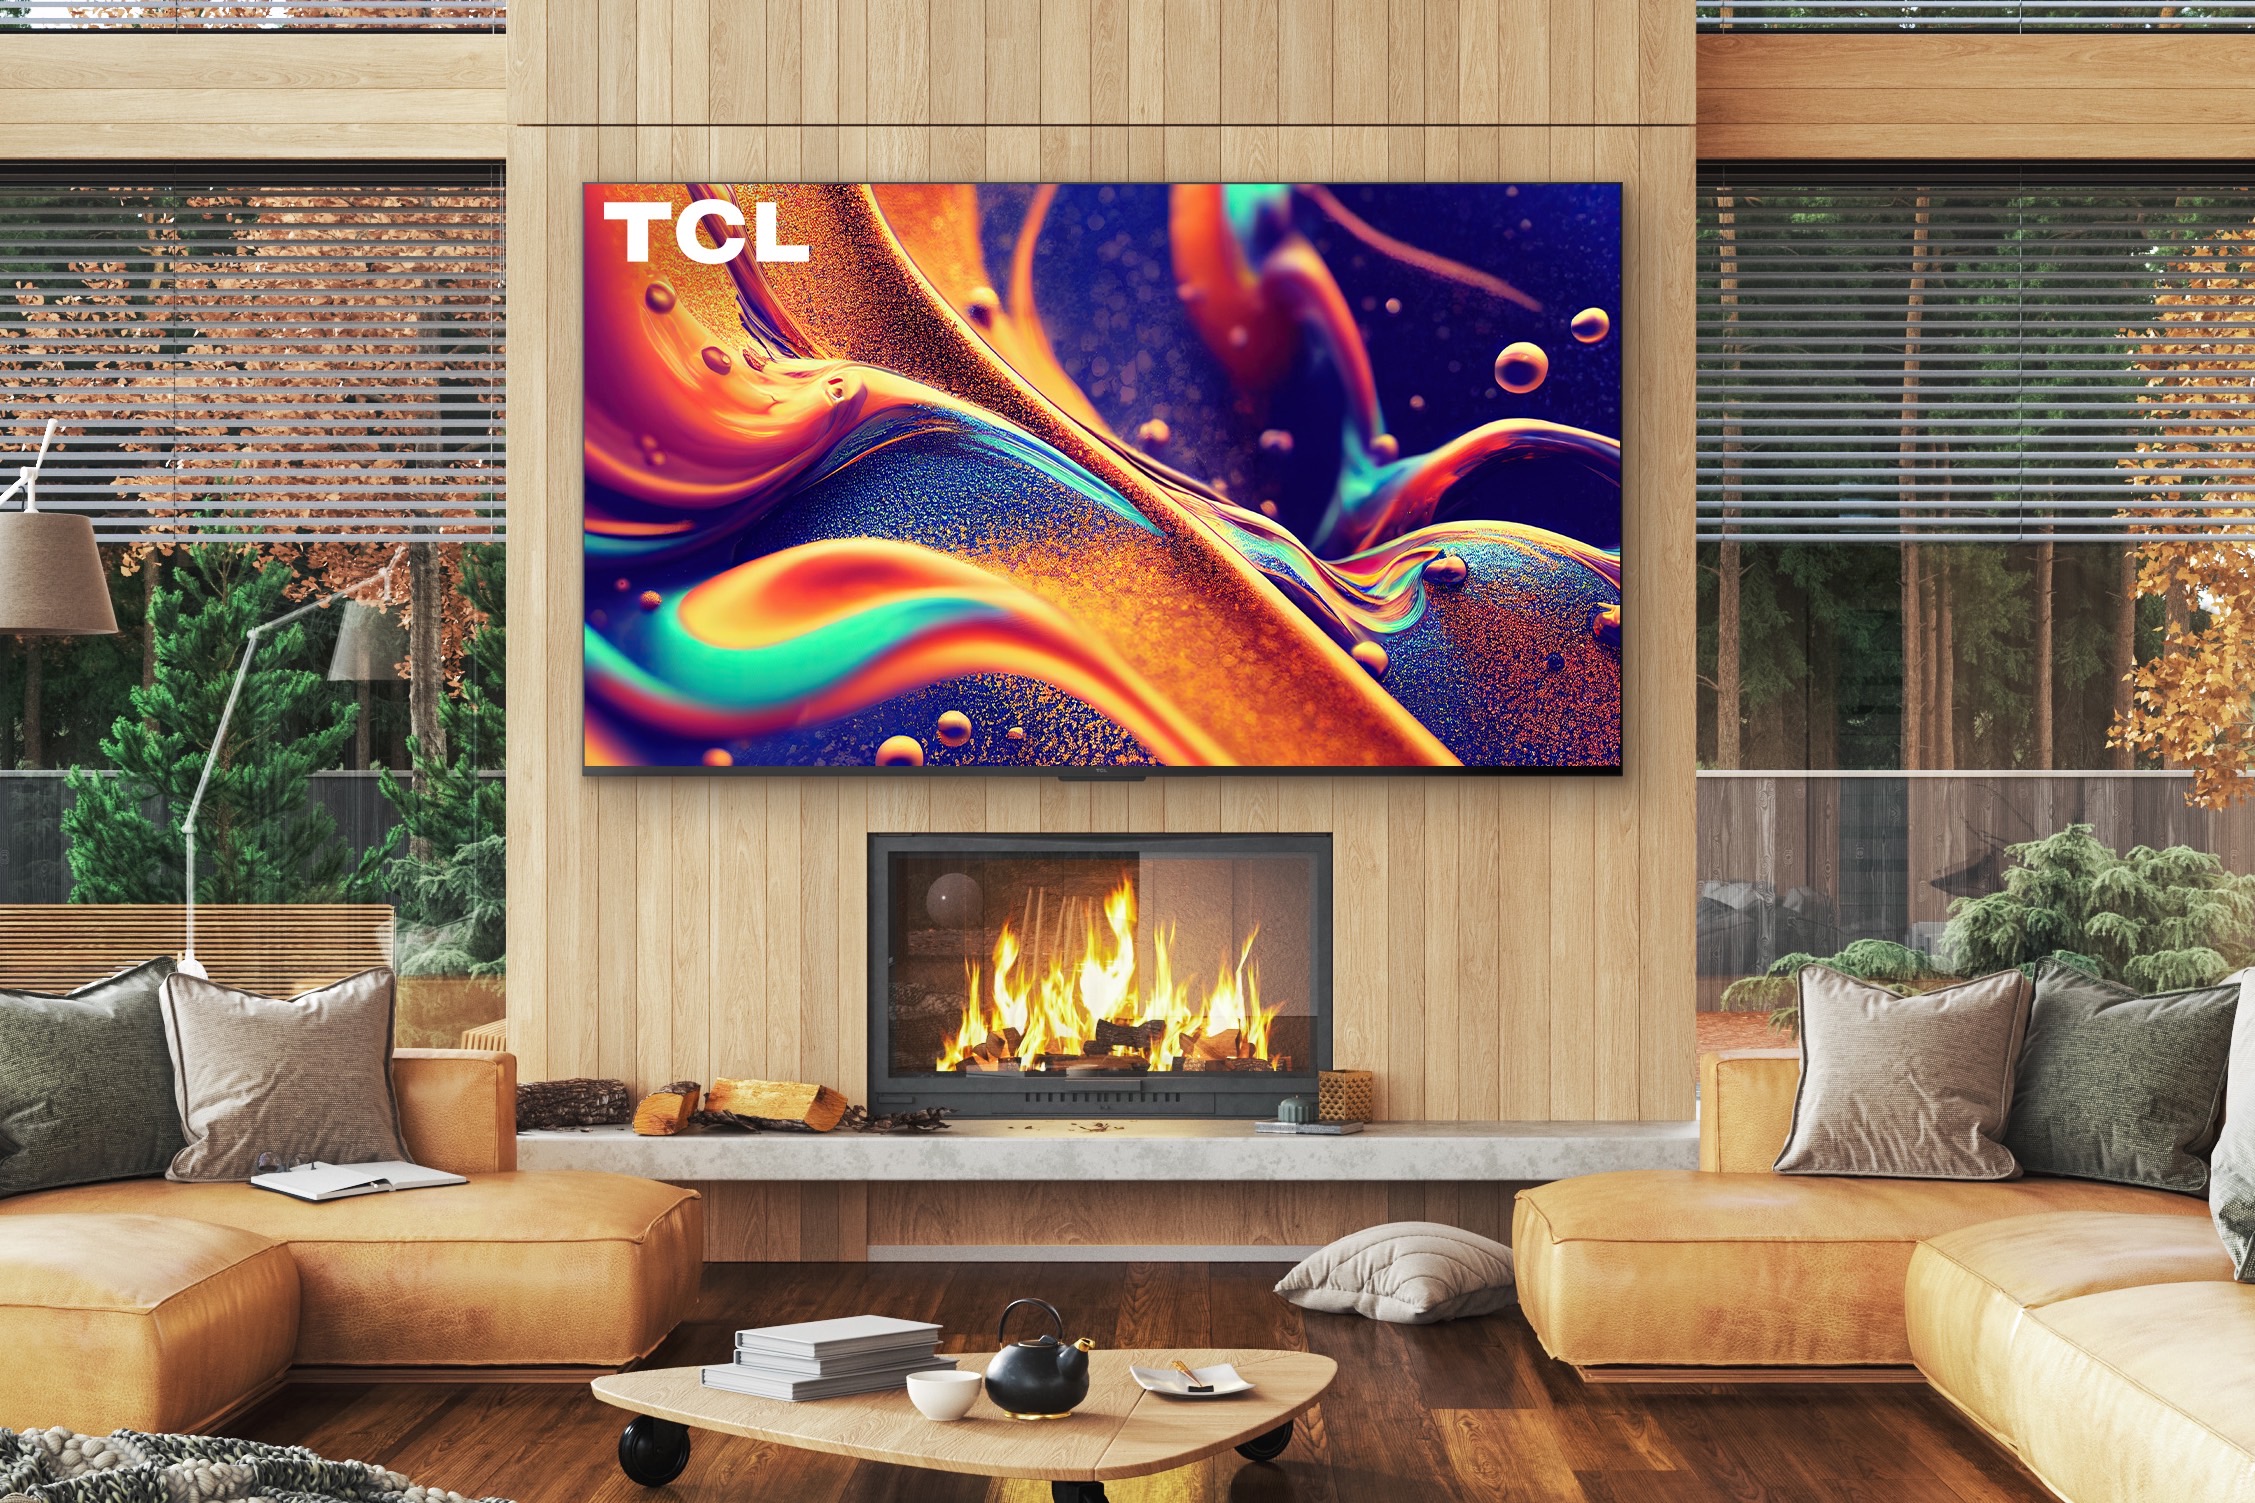 100-inch 4K TVs are coming, but we're not ready for them